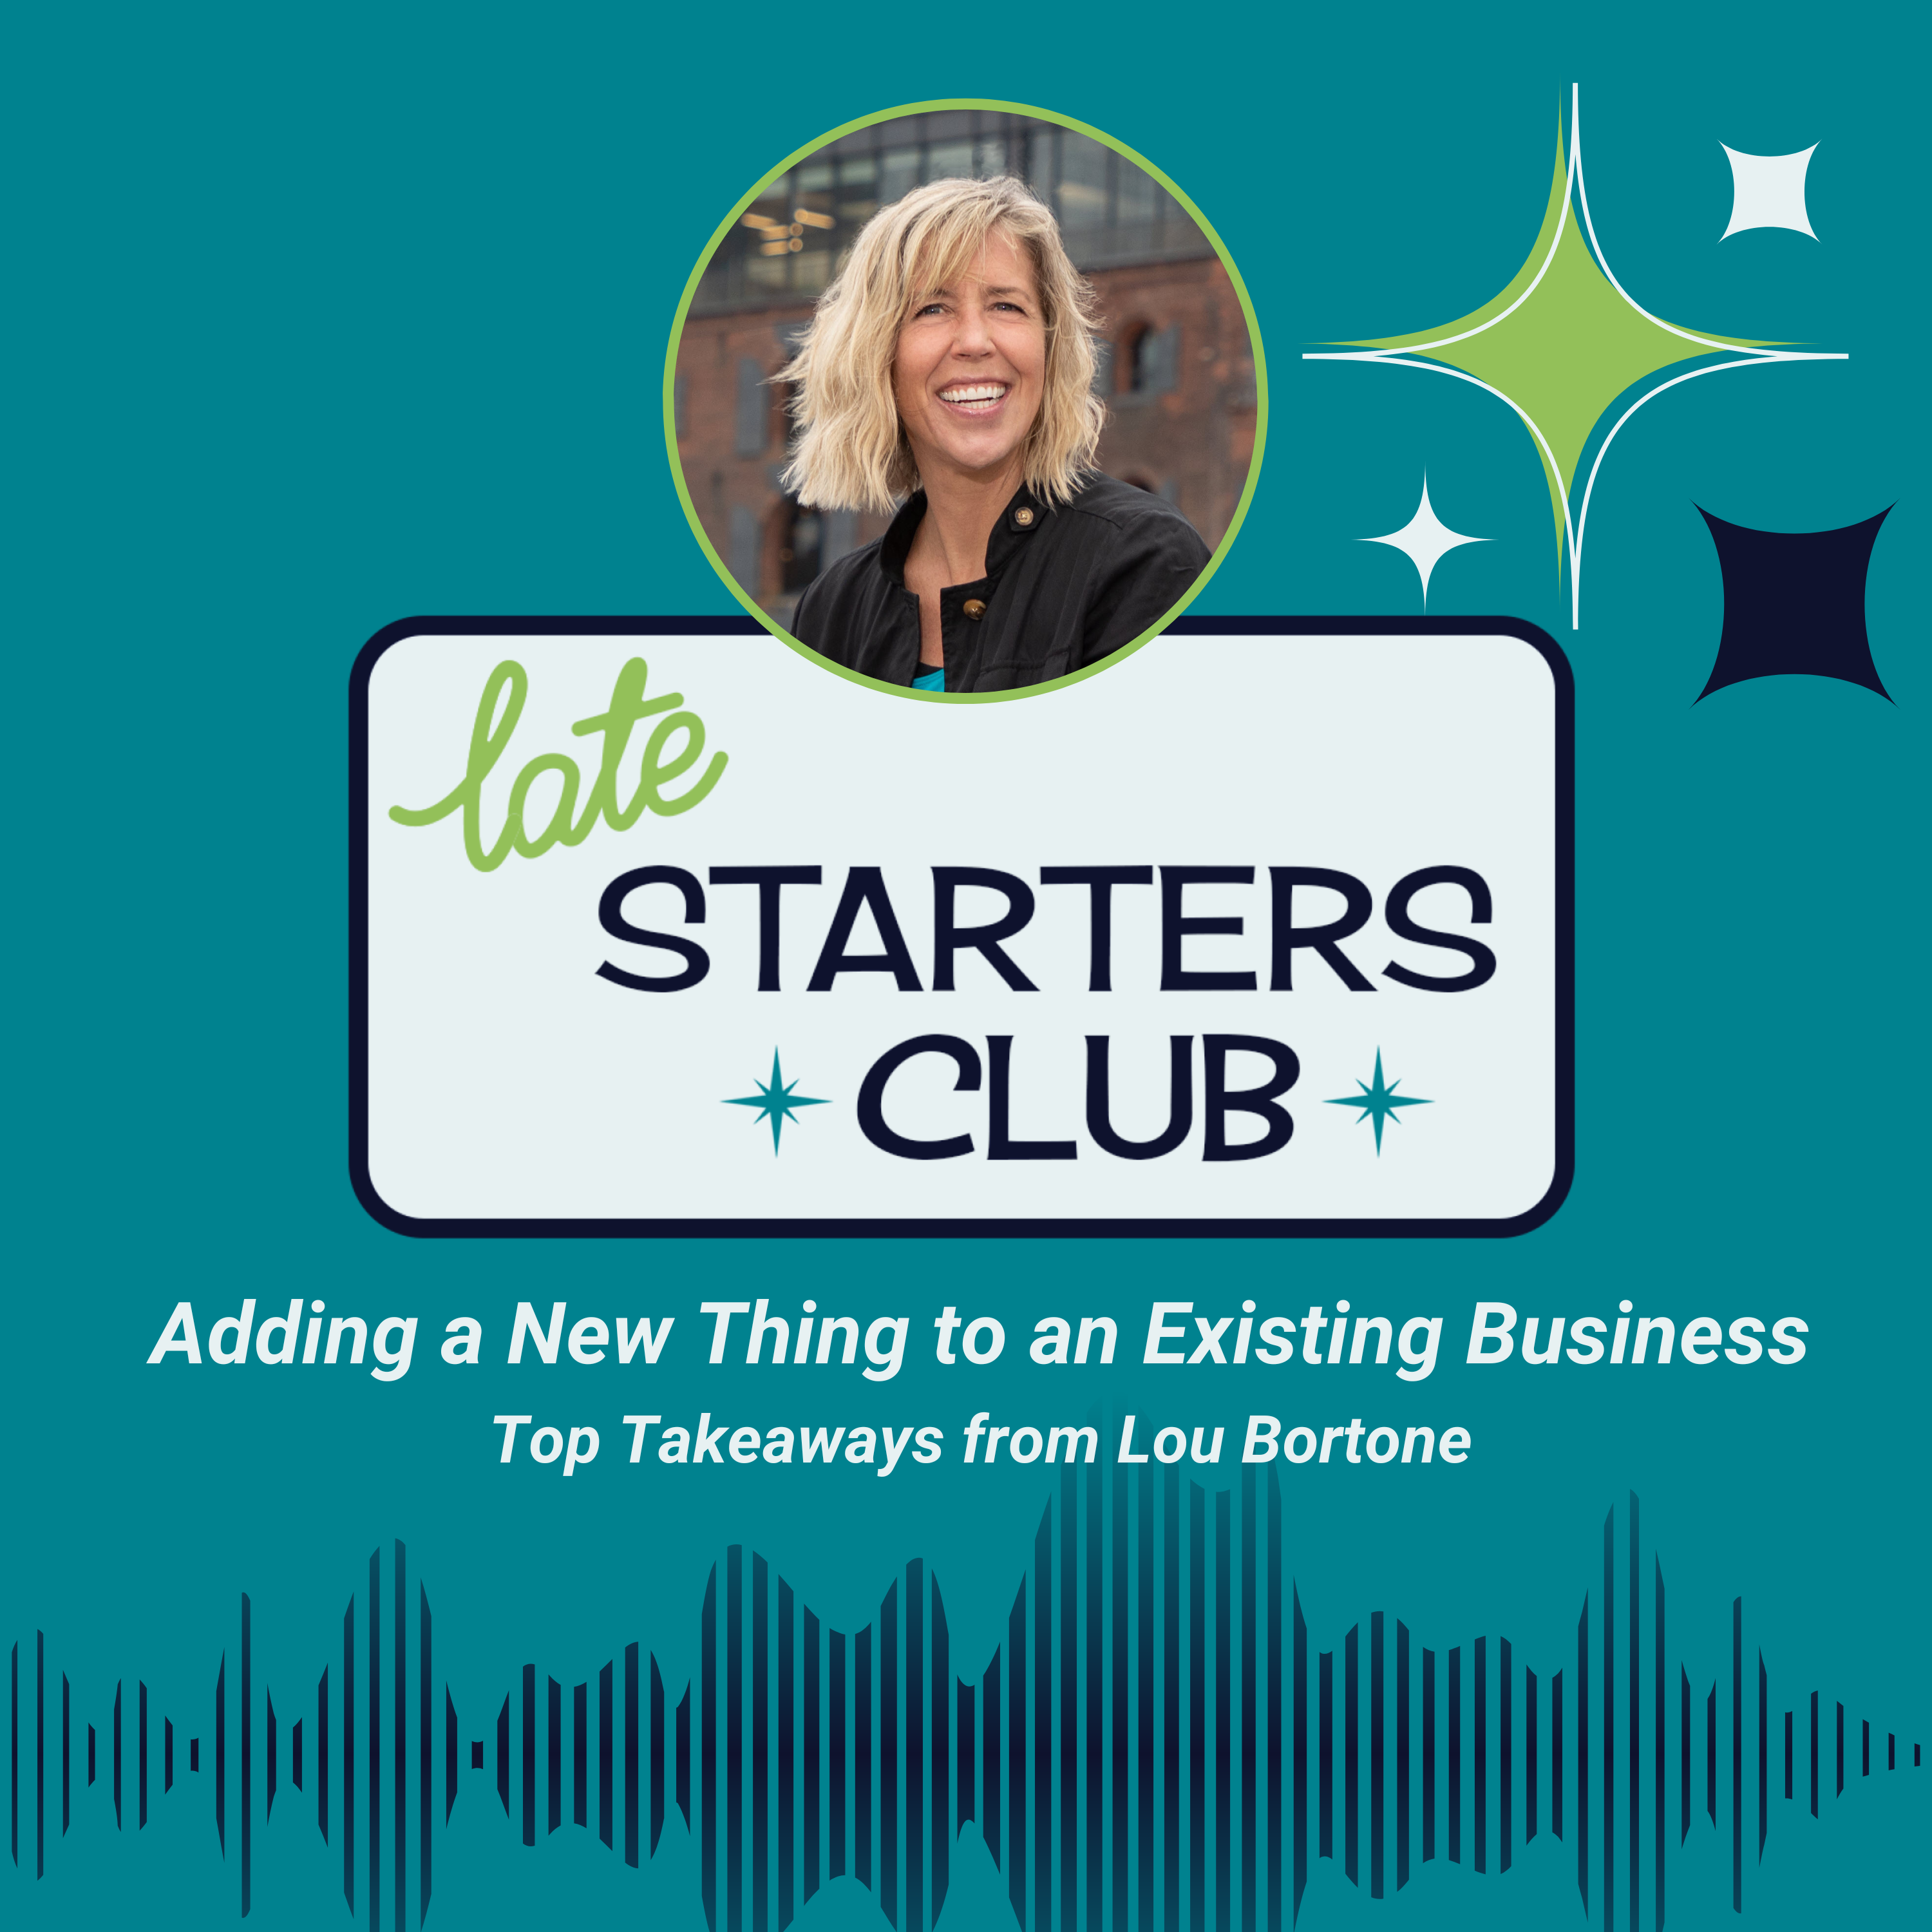 59: Adding a New Thing to an Existing Business – Top Takeaways from Lou Bortone